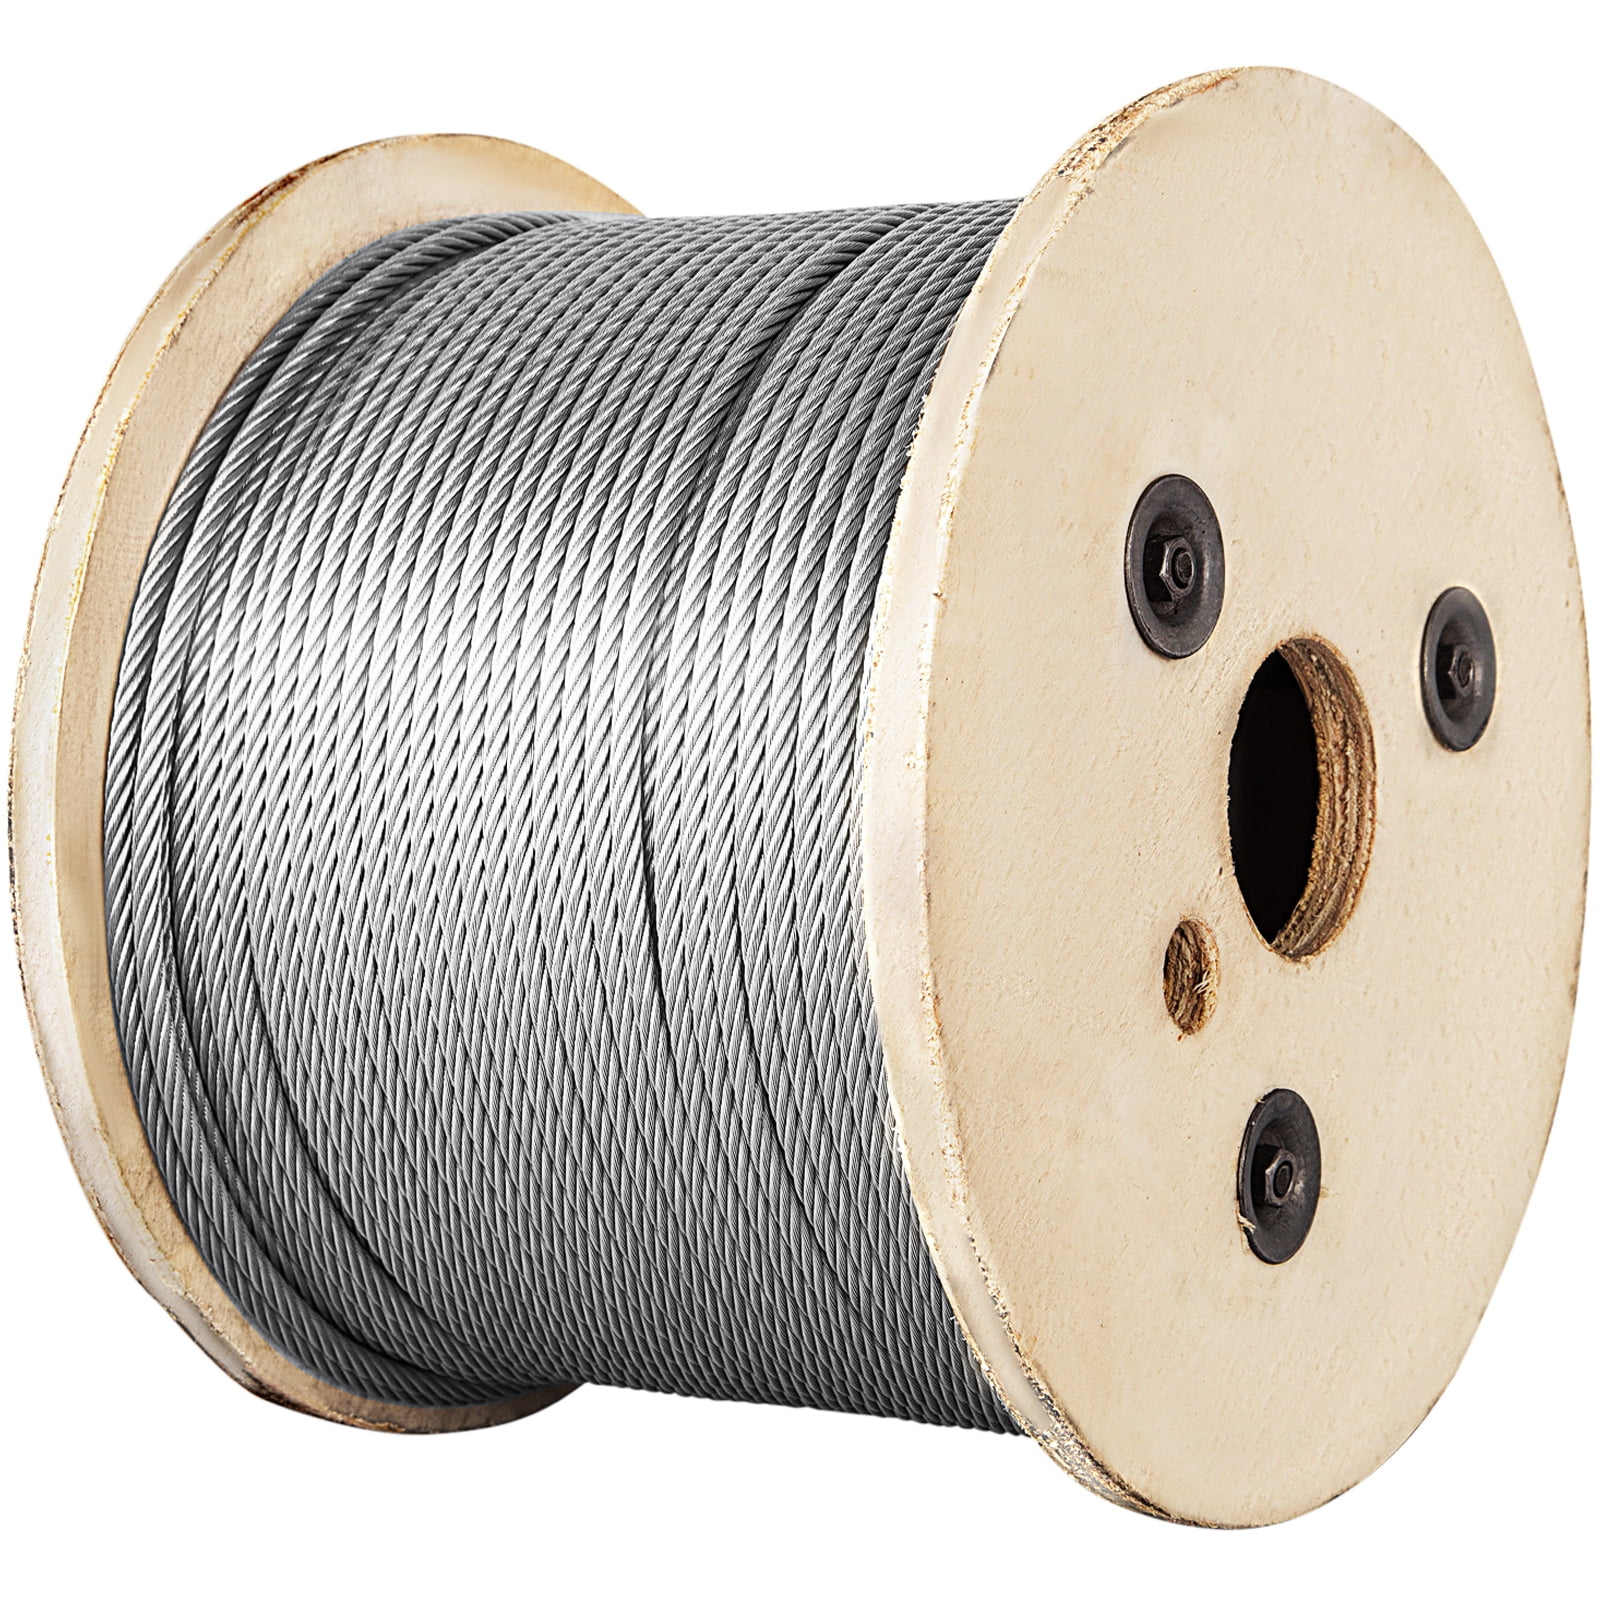 1/4 Inch Flagpole Rope Spool (1000 ft), no wire center